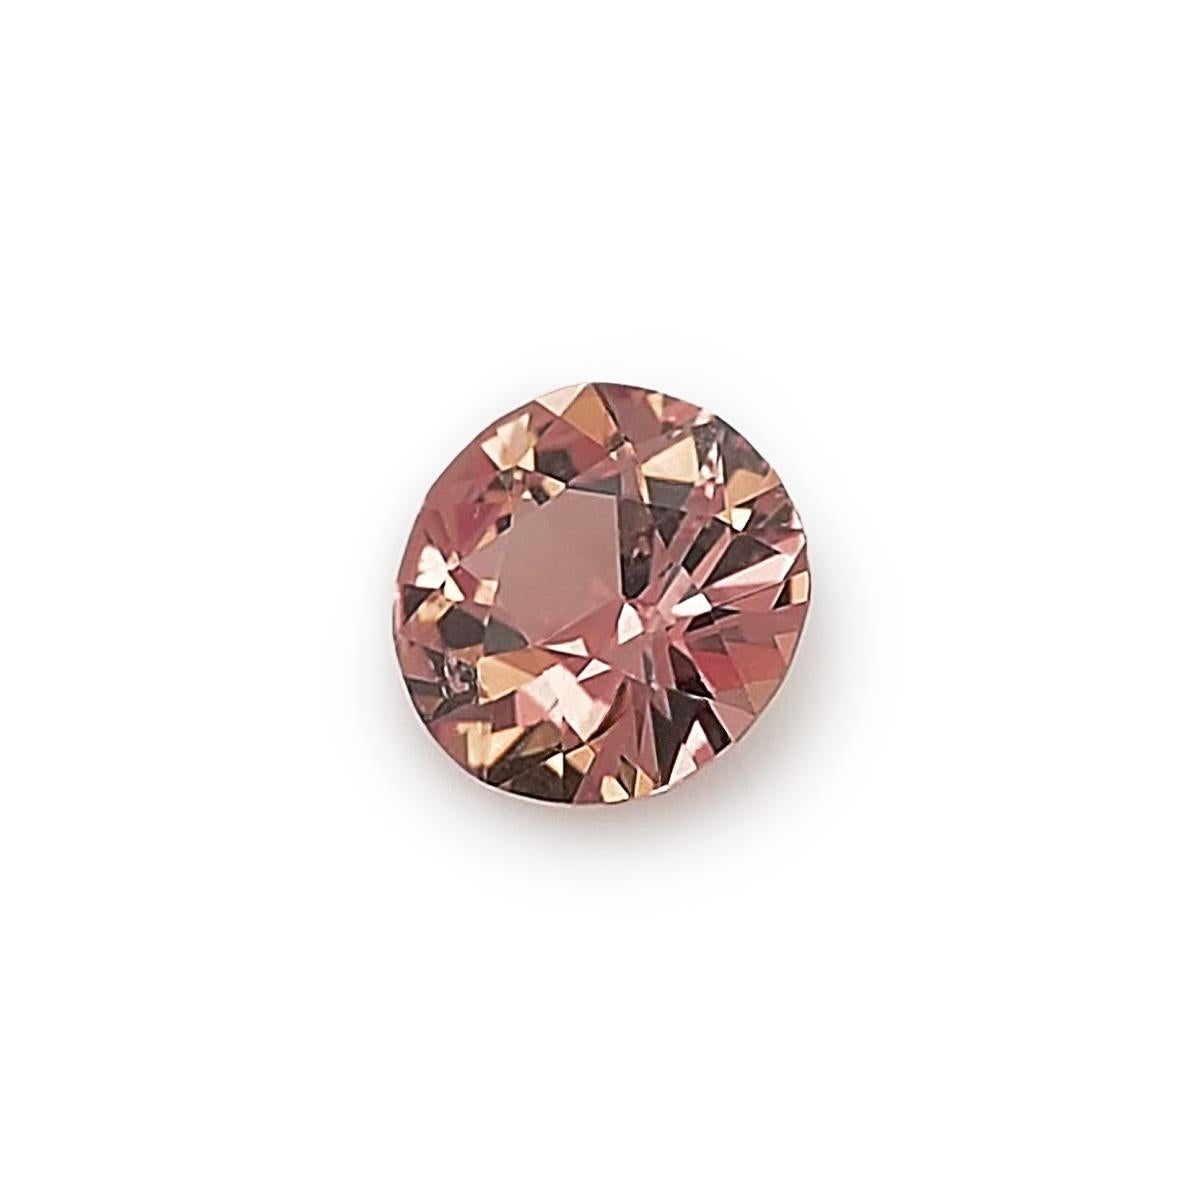 Brilliant Cut AIGS Certified 0.44 Carats Brown Sapphire For Sale